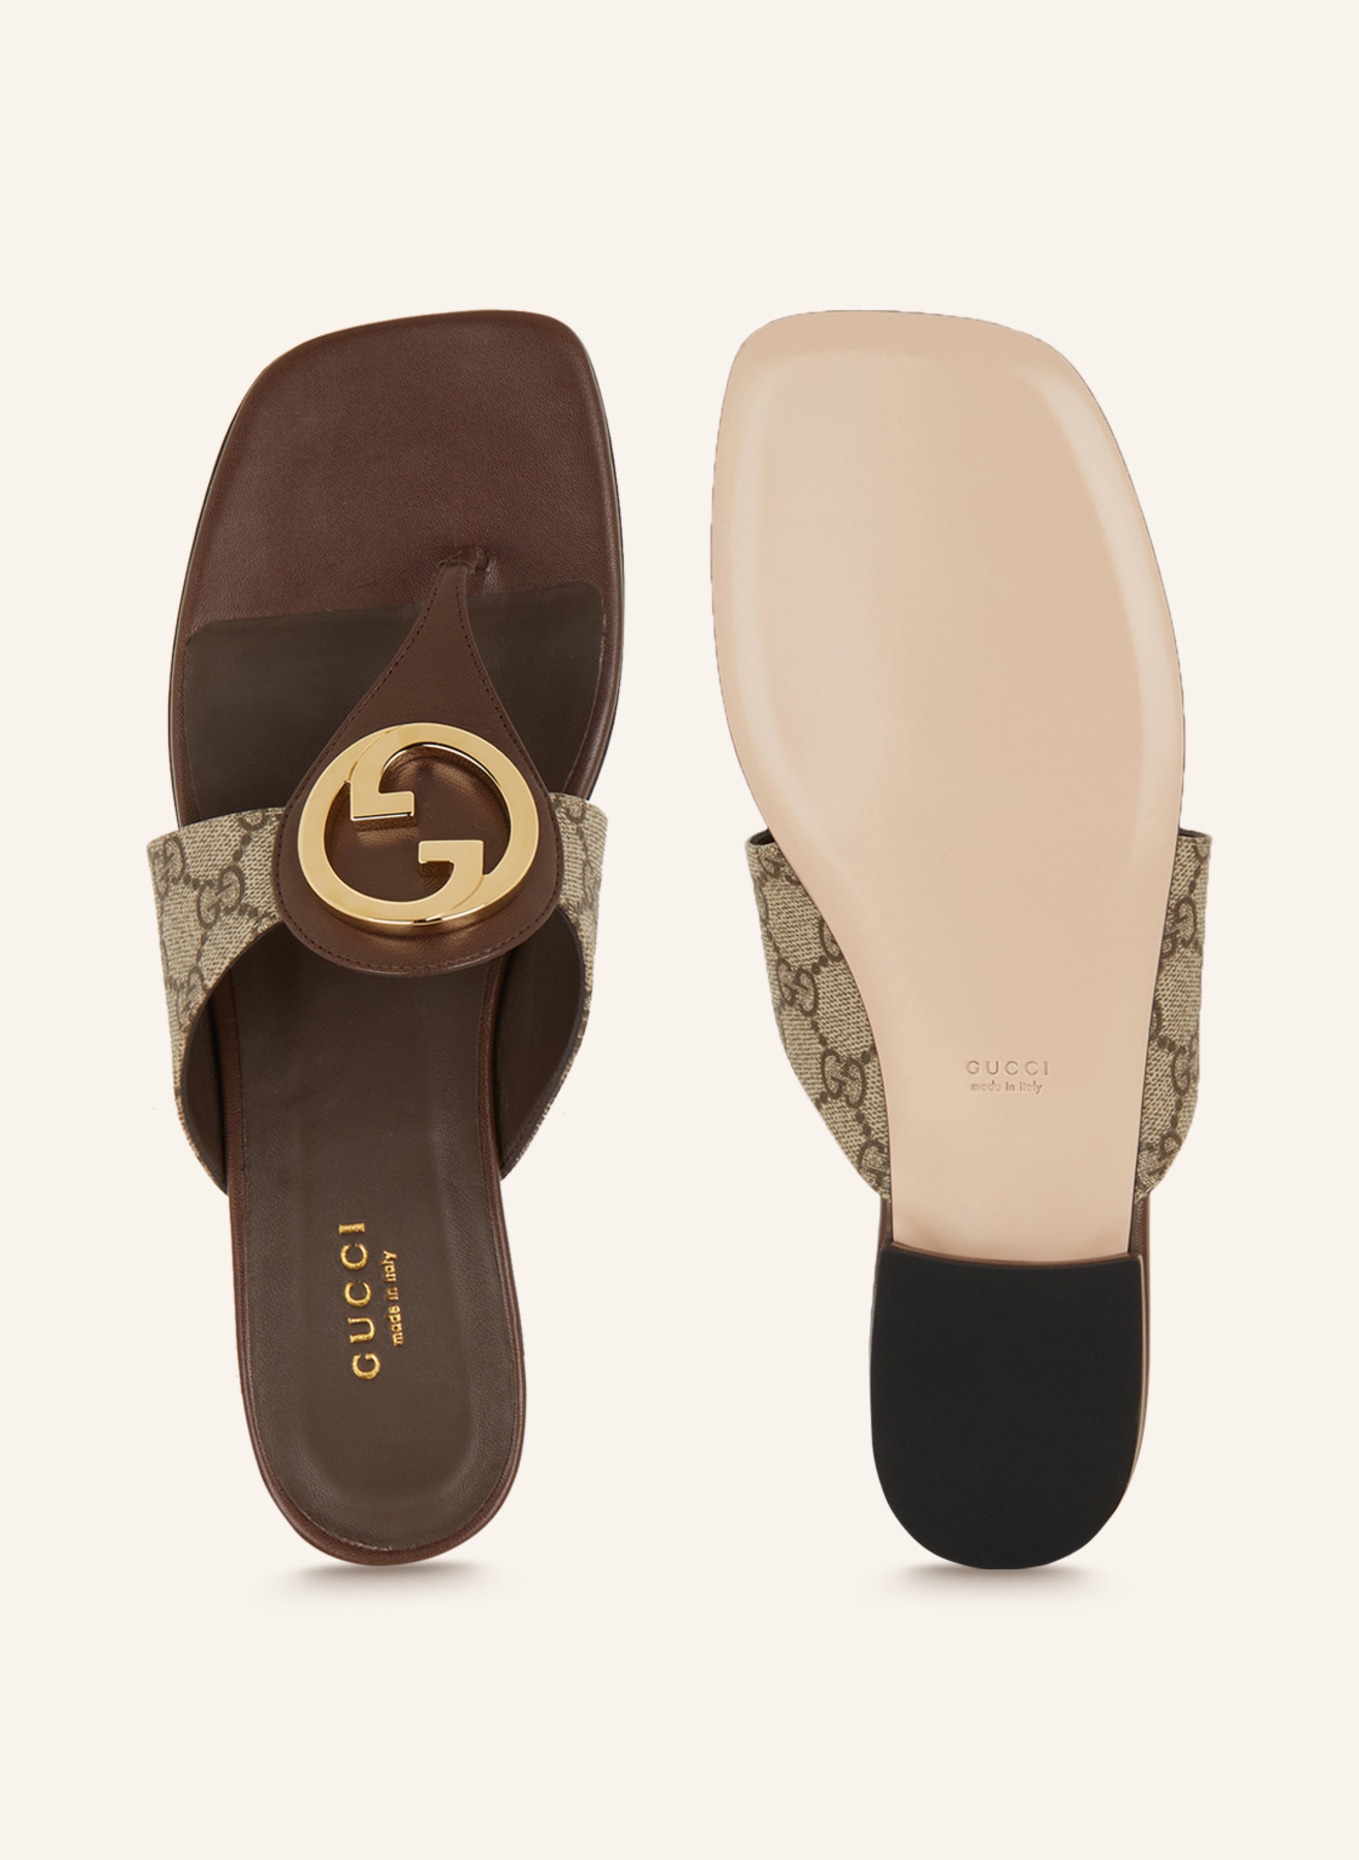 Gucci Leather GG Marmont Thong Sandals - Size 10 / 40 (SHF-8lraB5) – LuxeDH